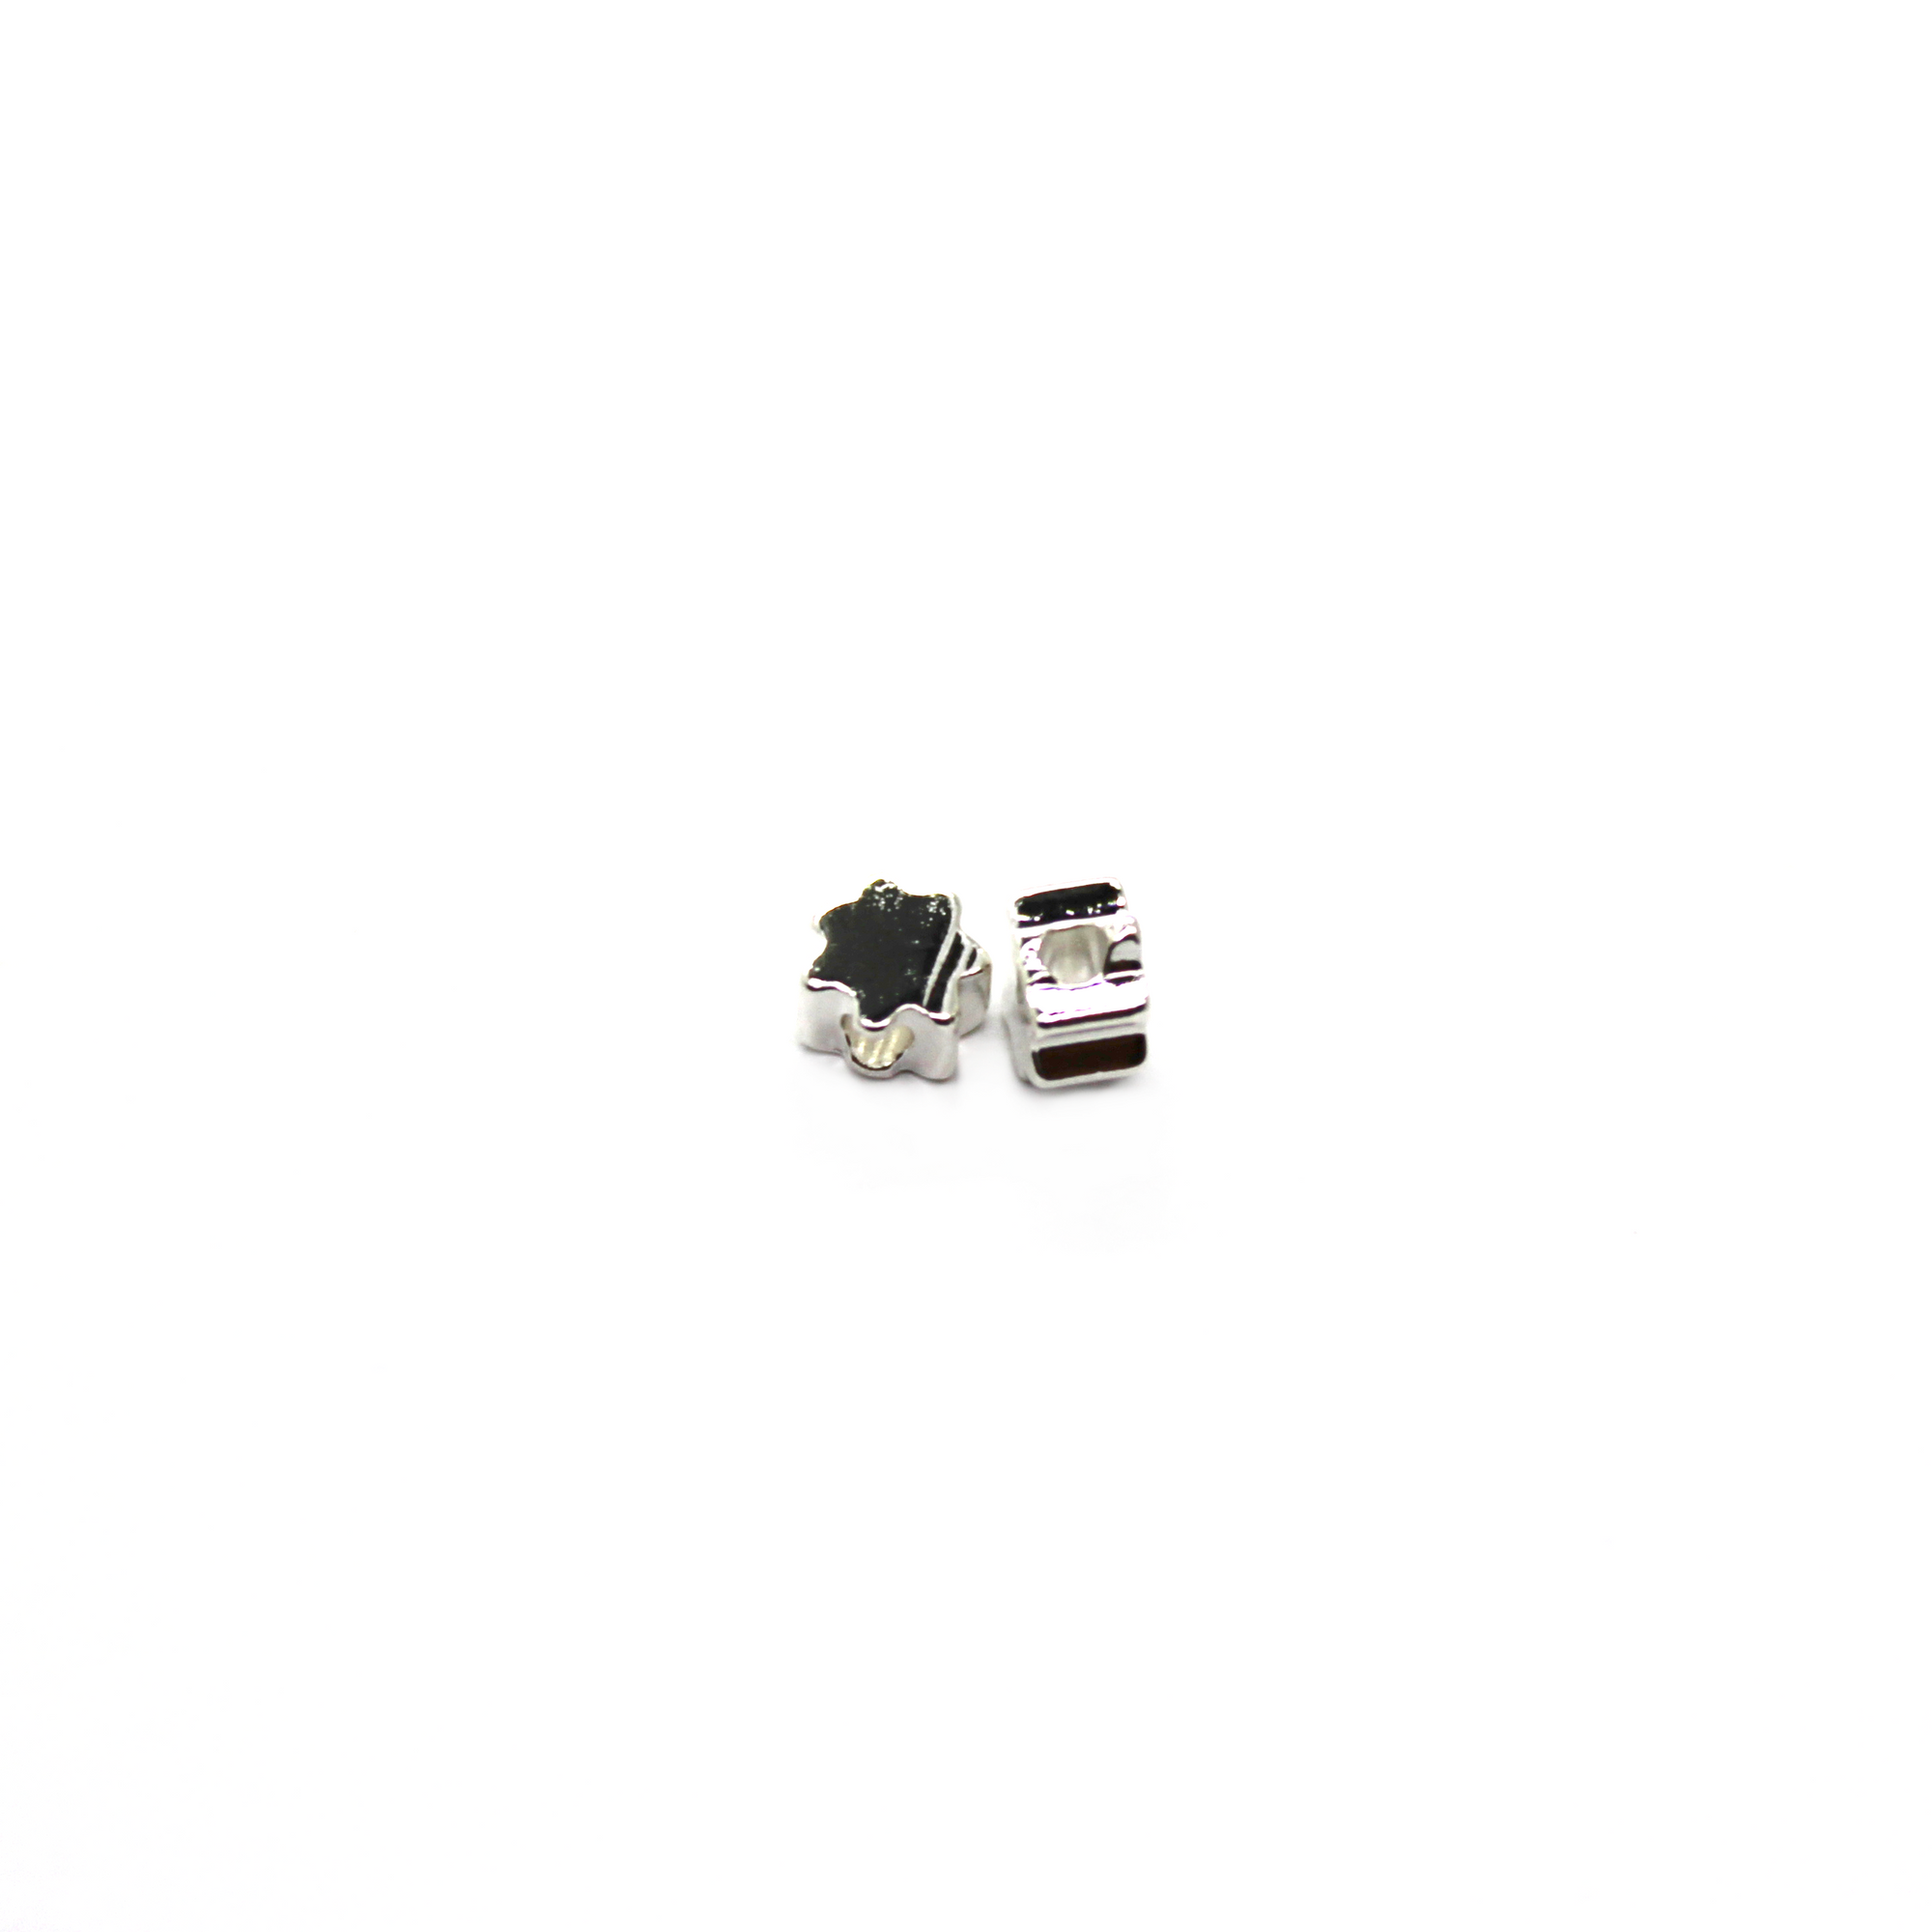 Spacer, Small Star, Bright Silver, Alloy, 4mm X 4mm, Sold Per pkg of 20